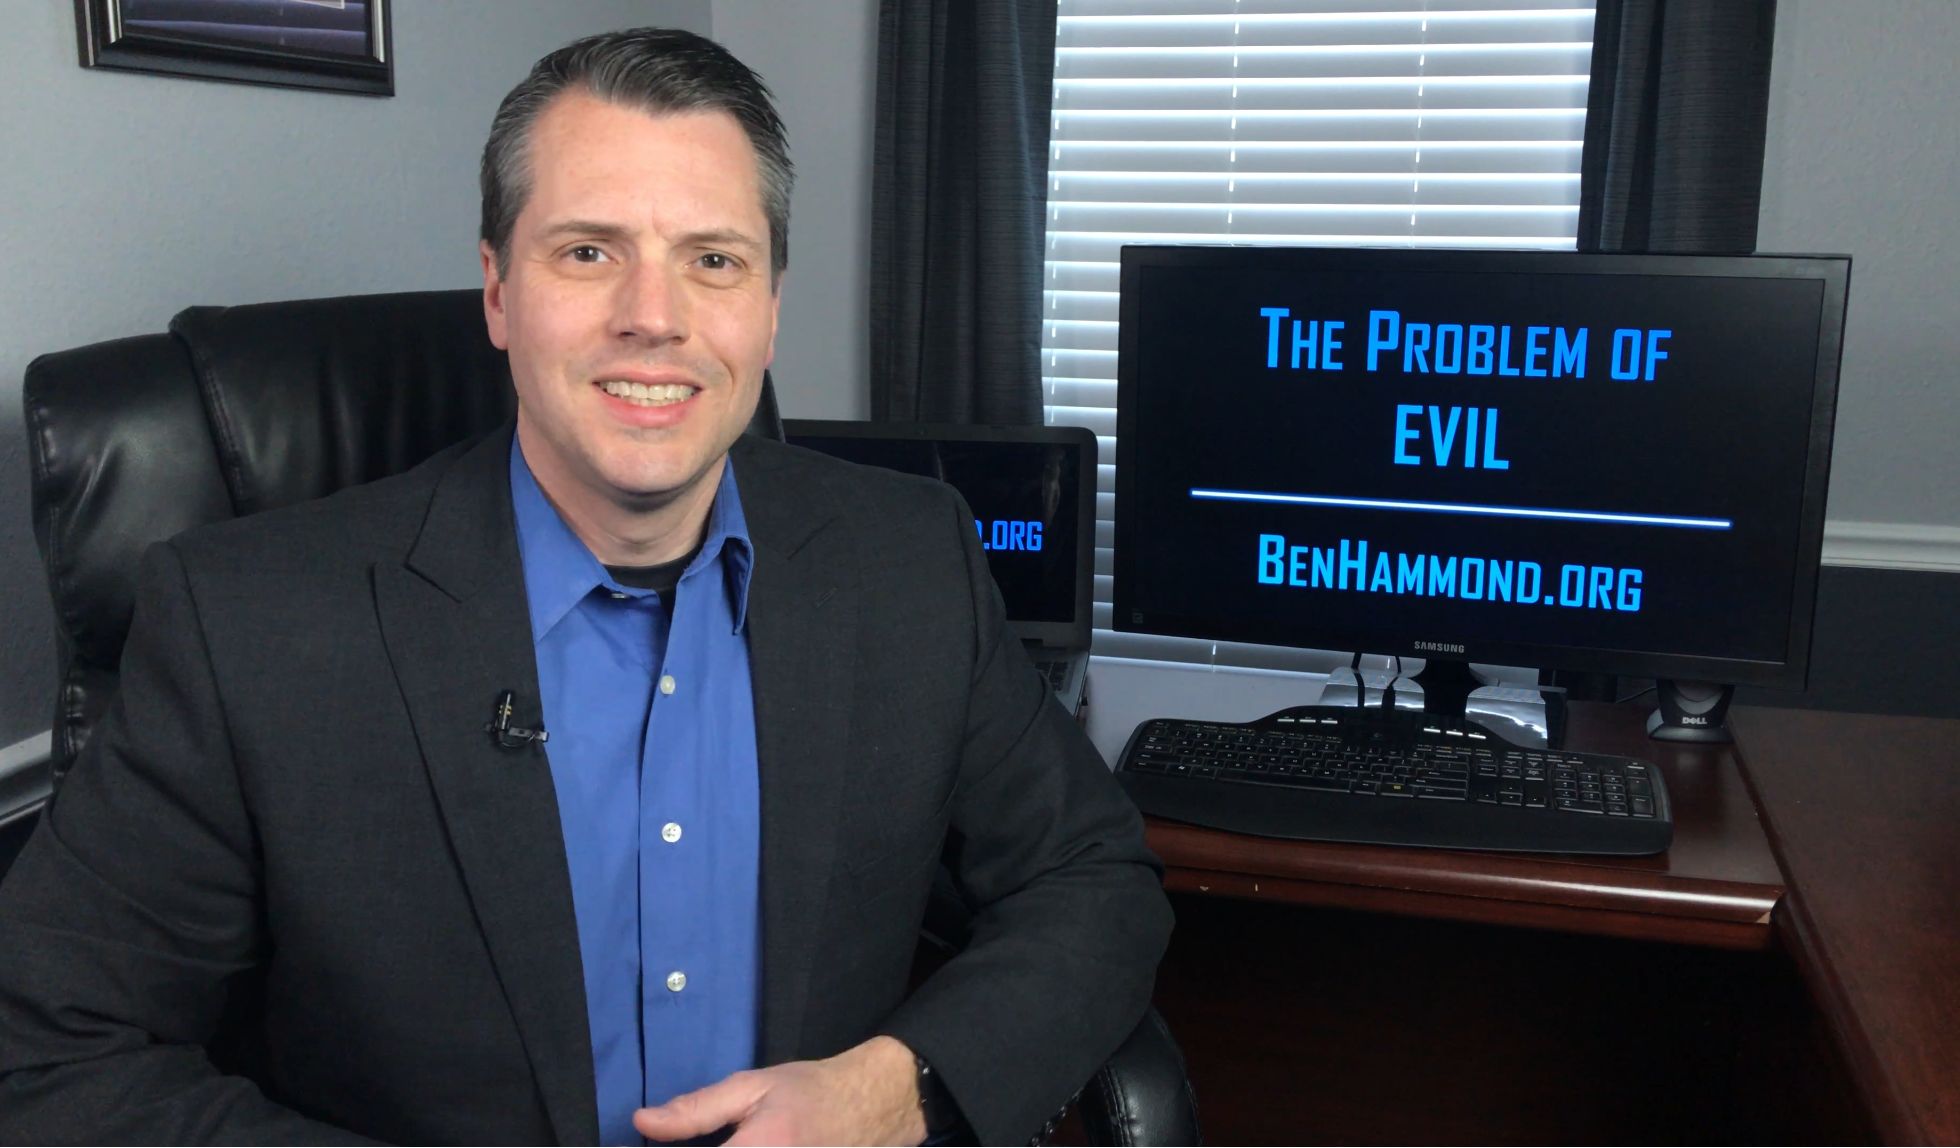 The Problem of Evil: How Can a Loving God Allow Evil?